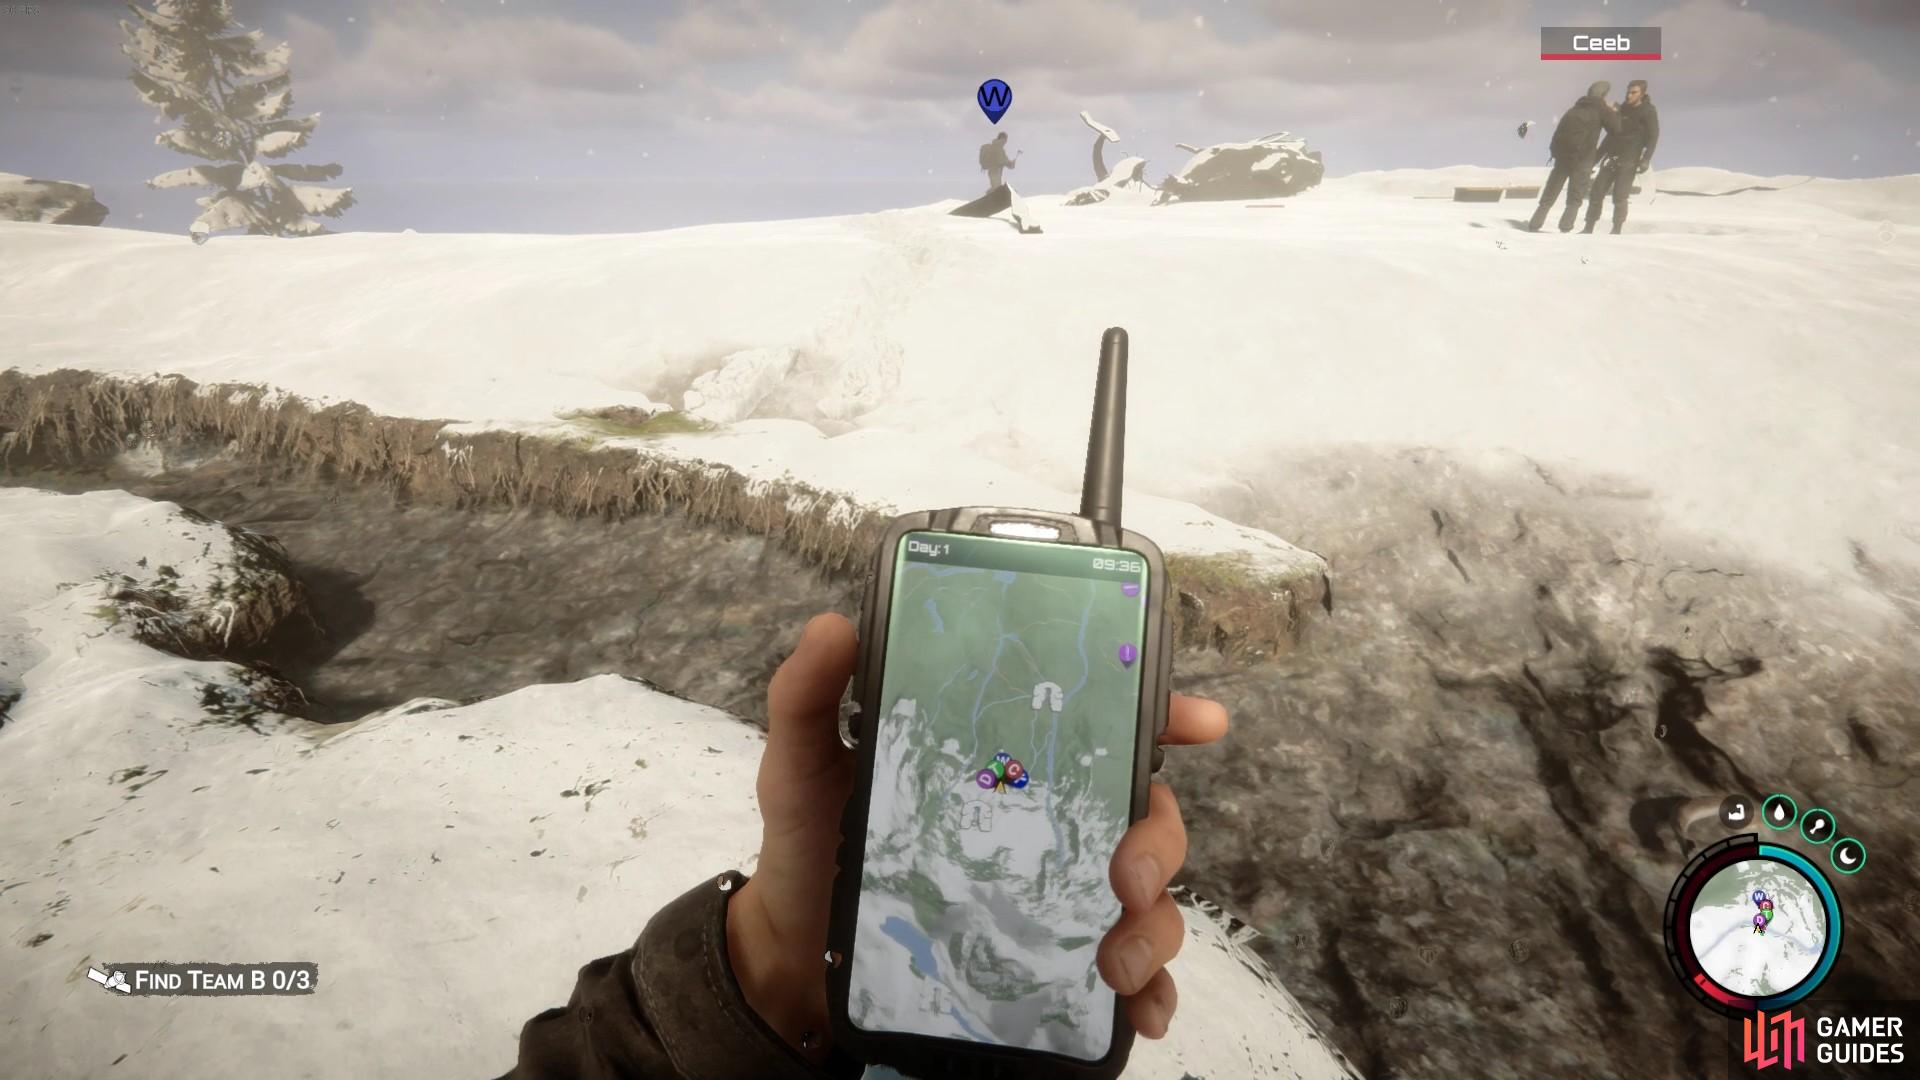 Head to the mountain helicopter crash site area, as seen on this GPS.